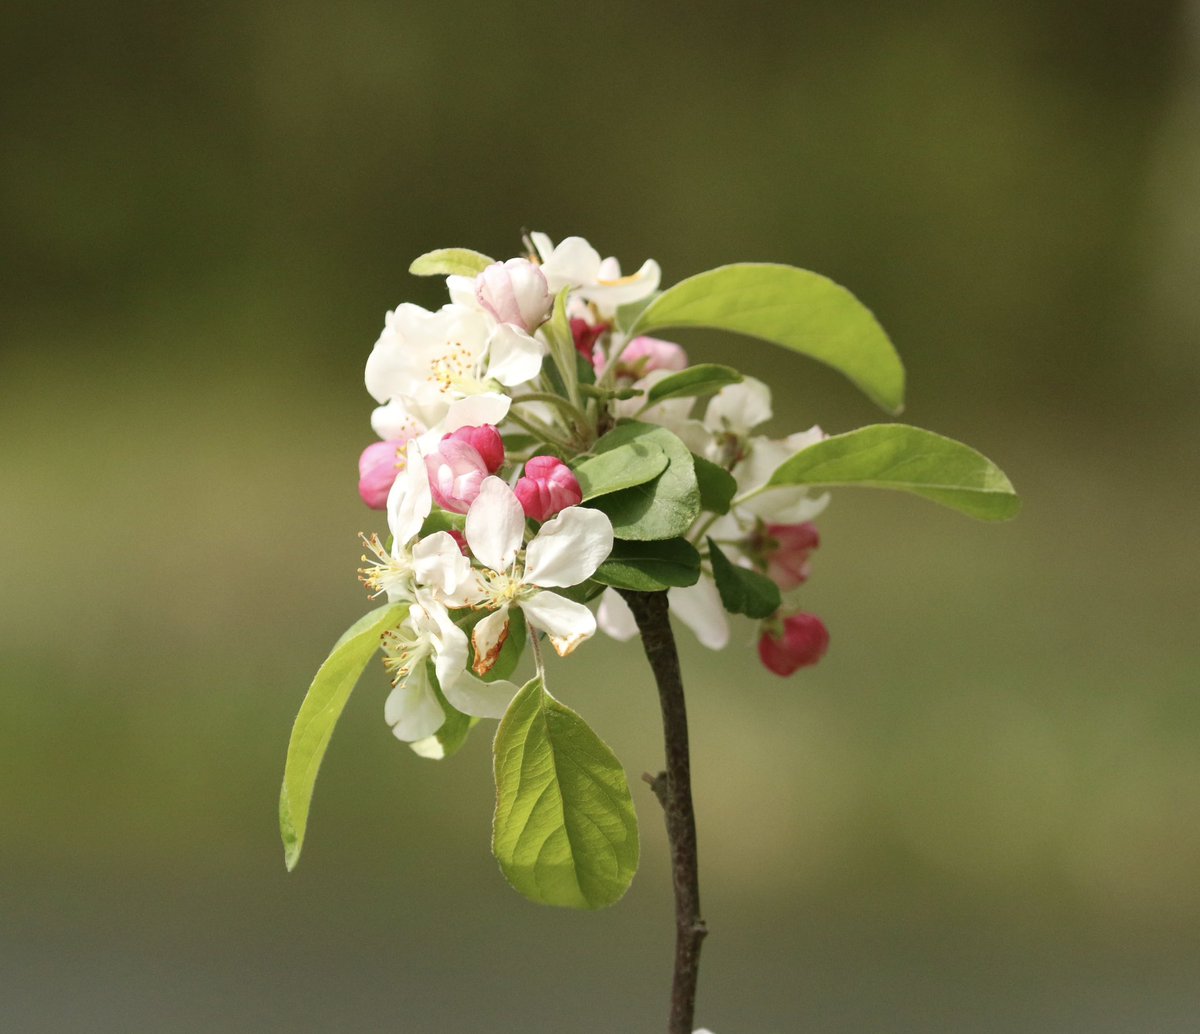 Nature pic for today: Crabapple in blossom, London